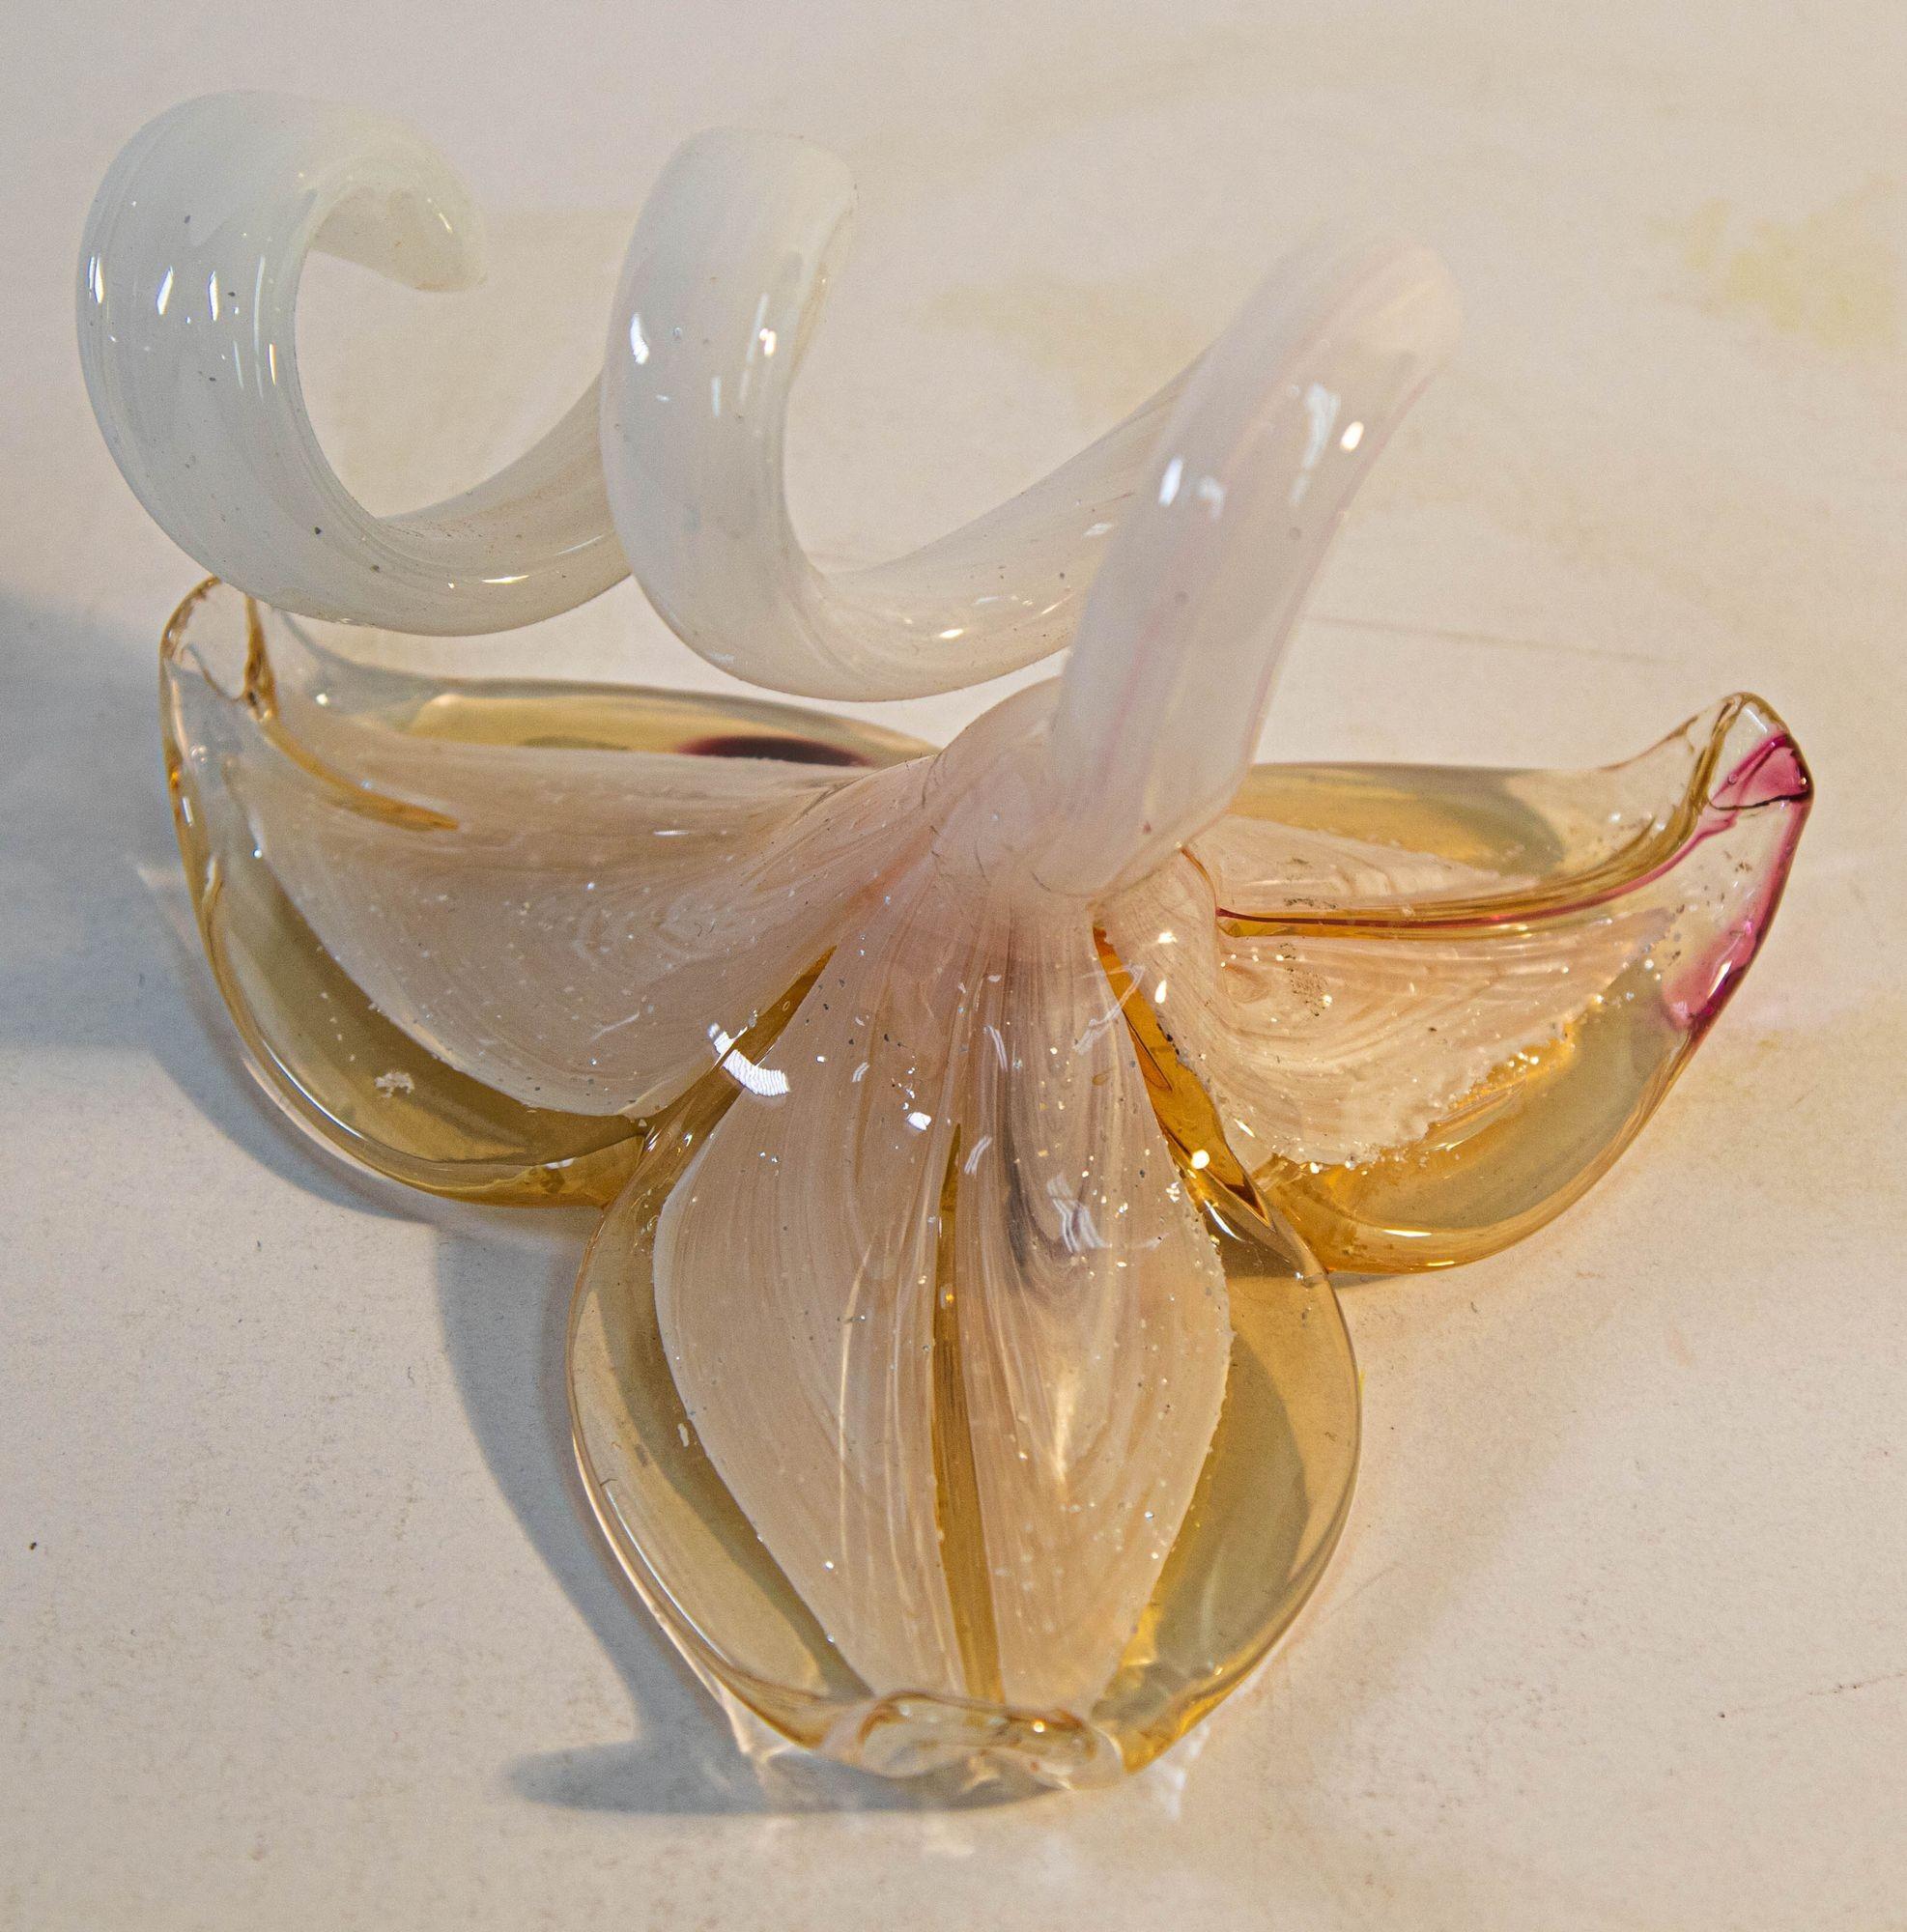 20th Century Italian Murano Art Glass Paperweight Lily Flower with Curled Stem Sculpture 1980 For Sale